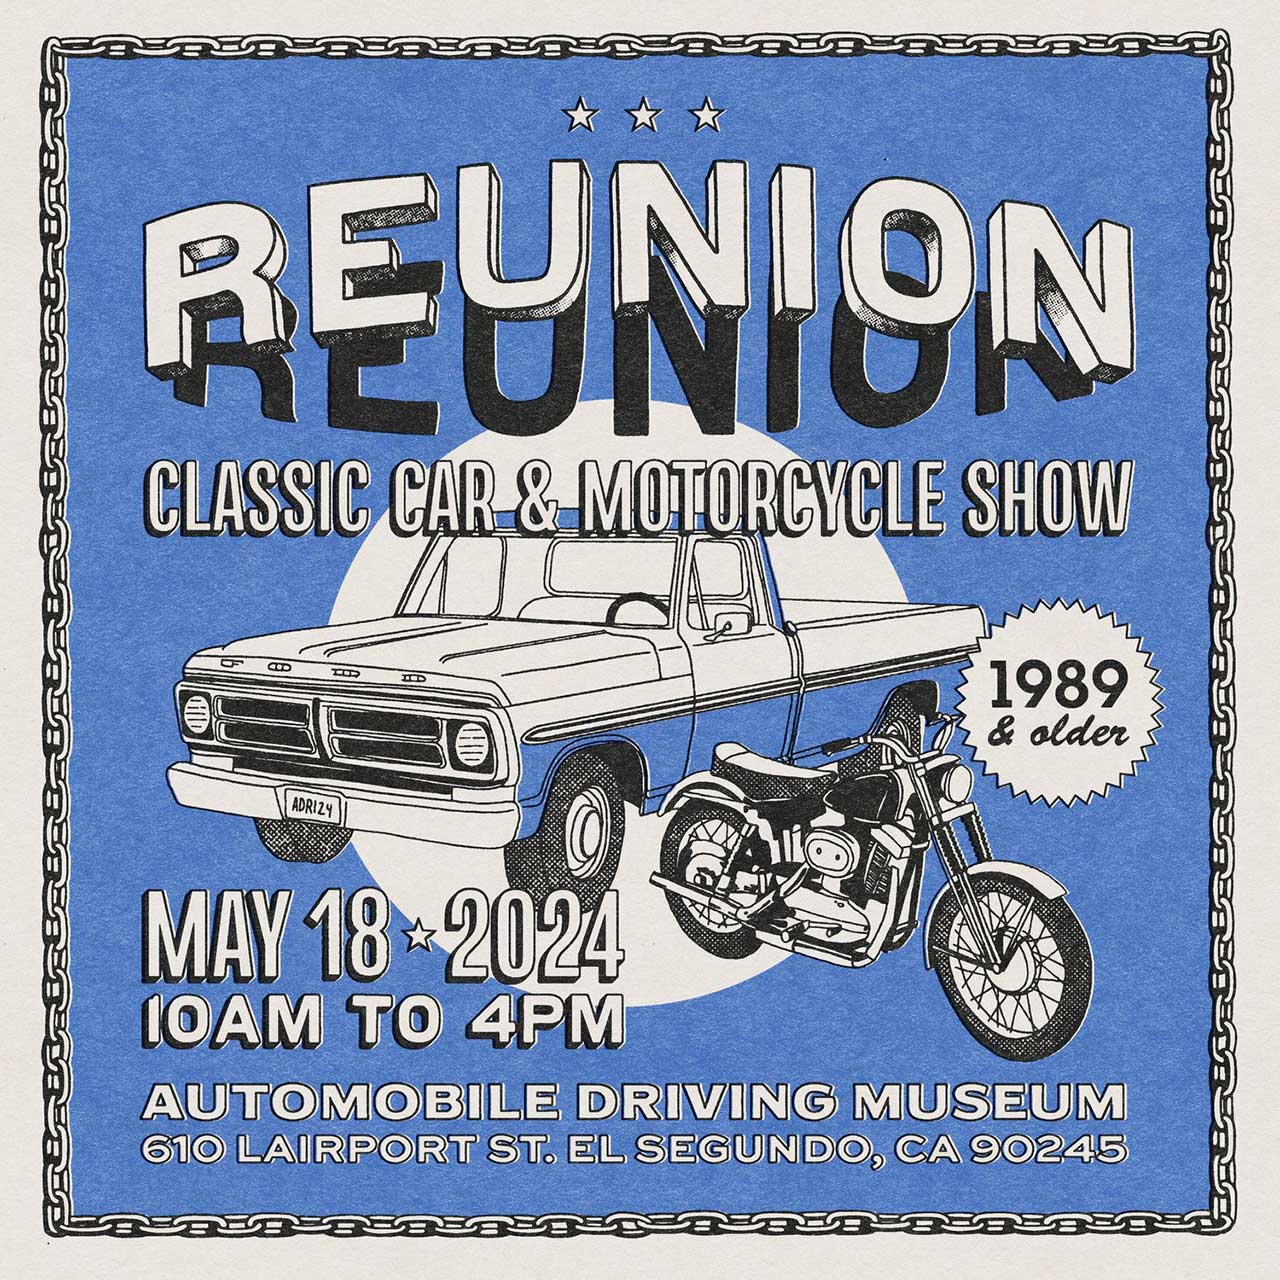 Reunion Classic Car & Motorcycle Show - May 18. 2024 from 10 am to 4 pm at the ZADM